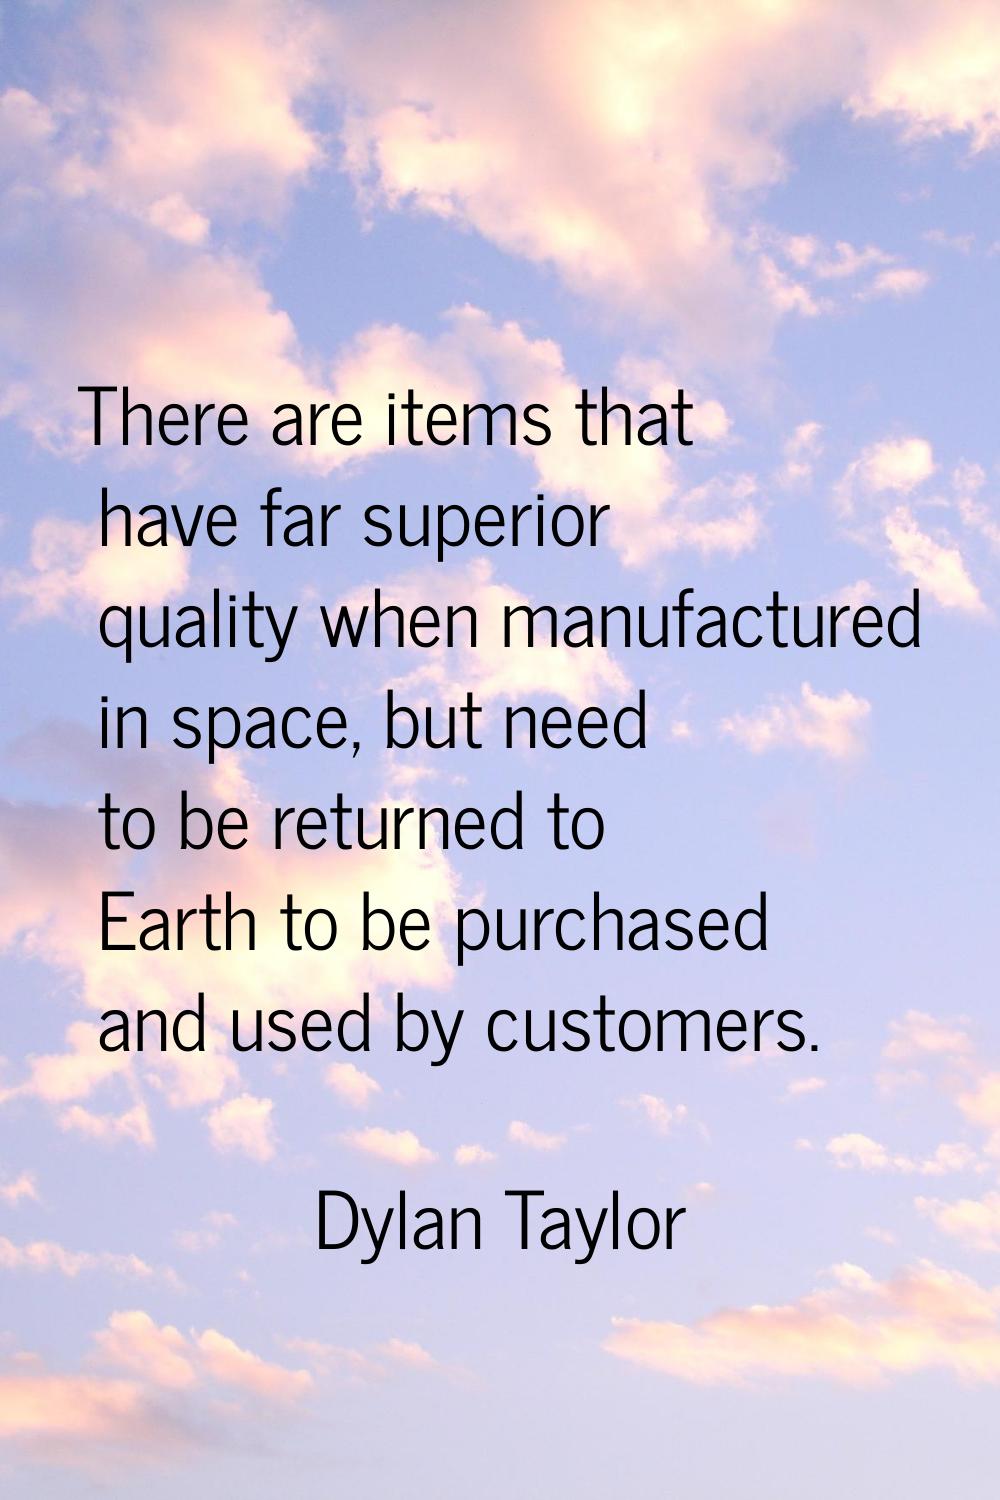 There are items that have far superior quality when manufactured in space, but need to be returned 